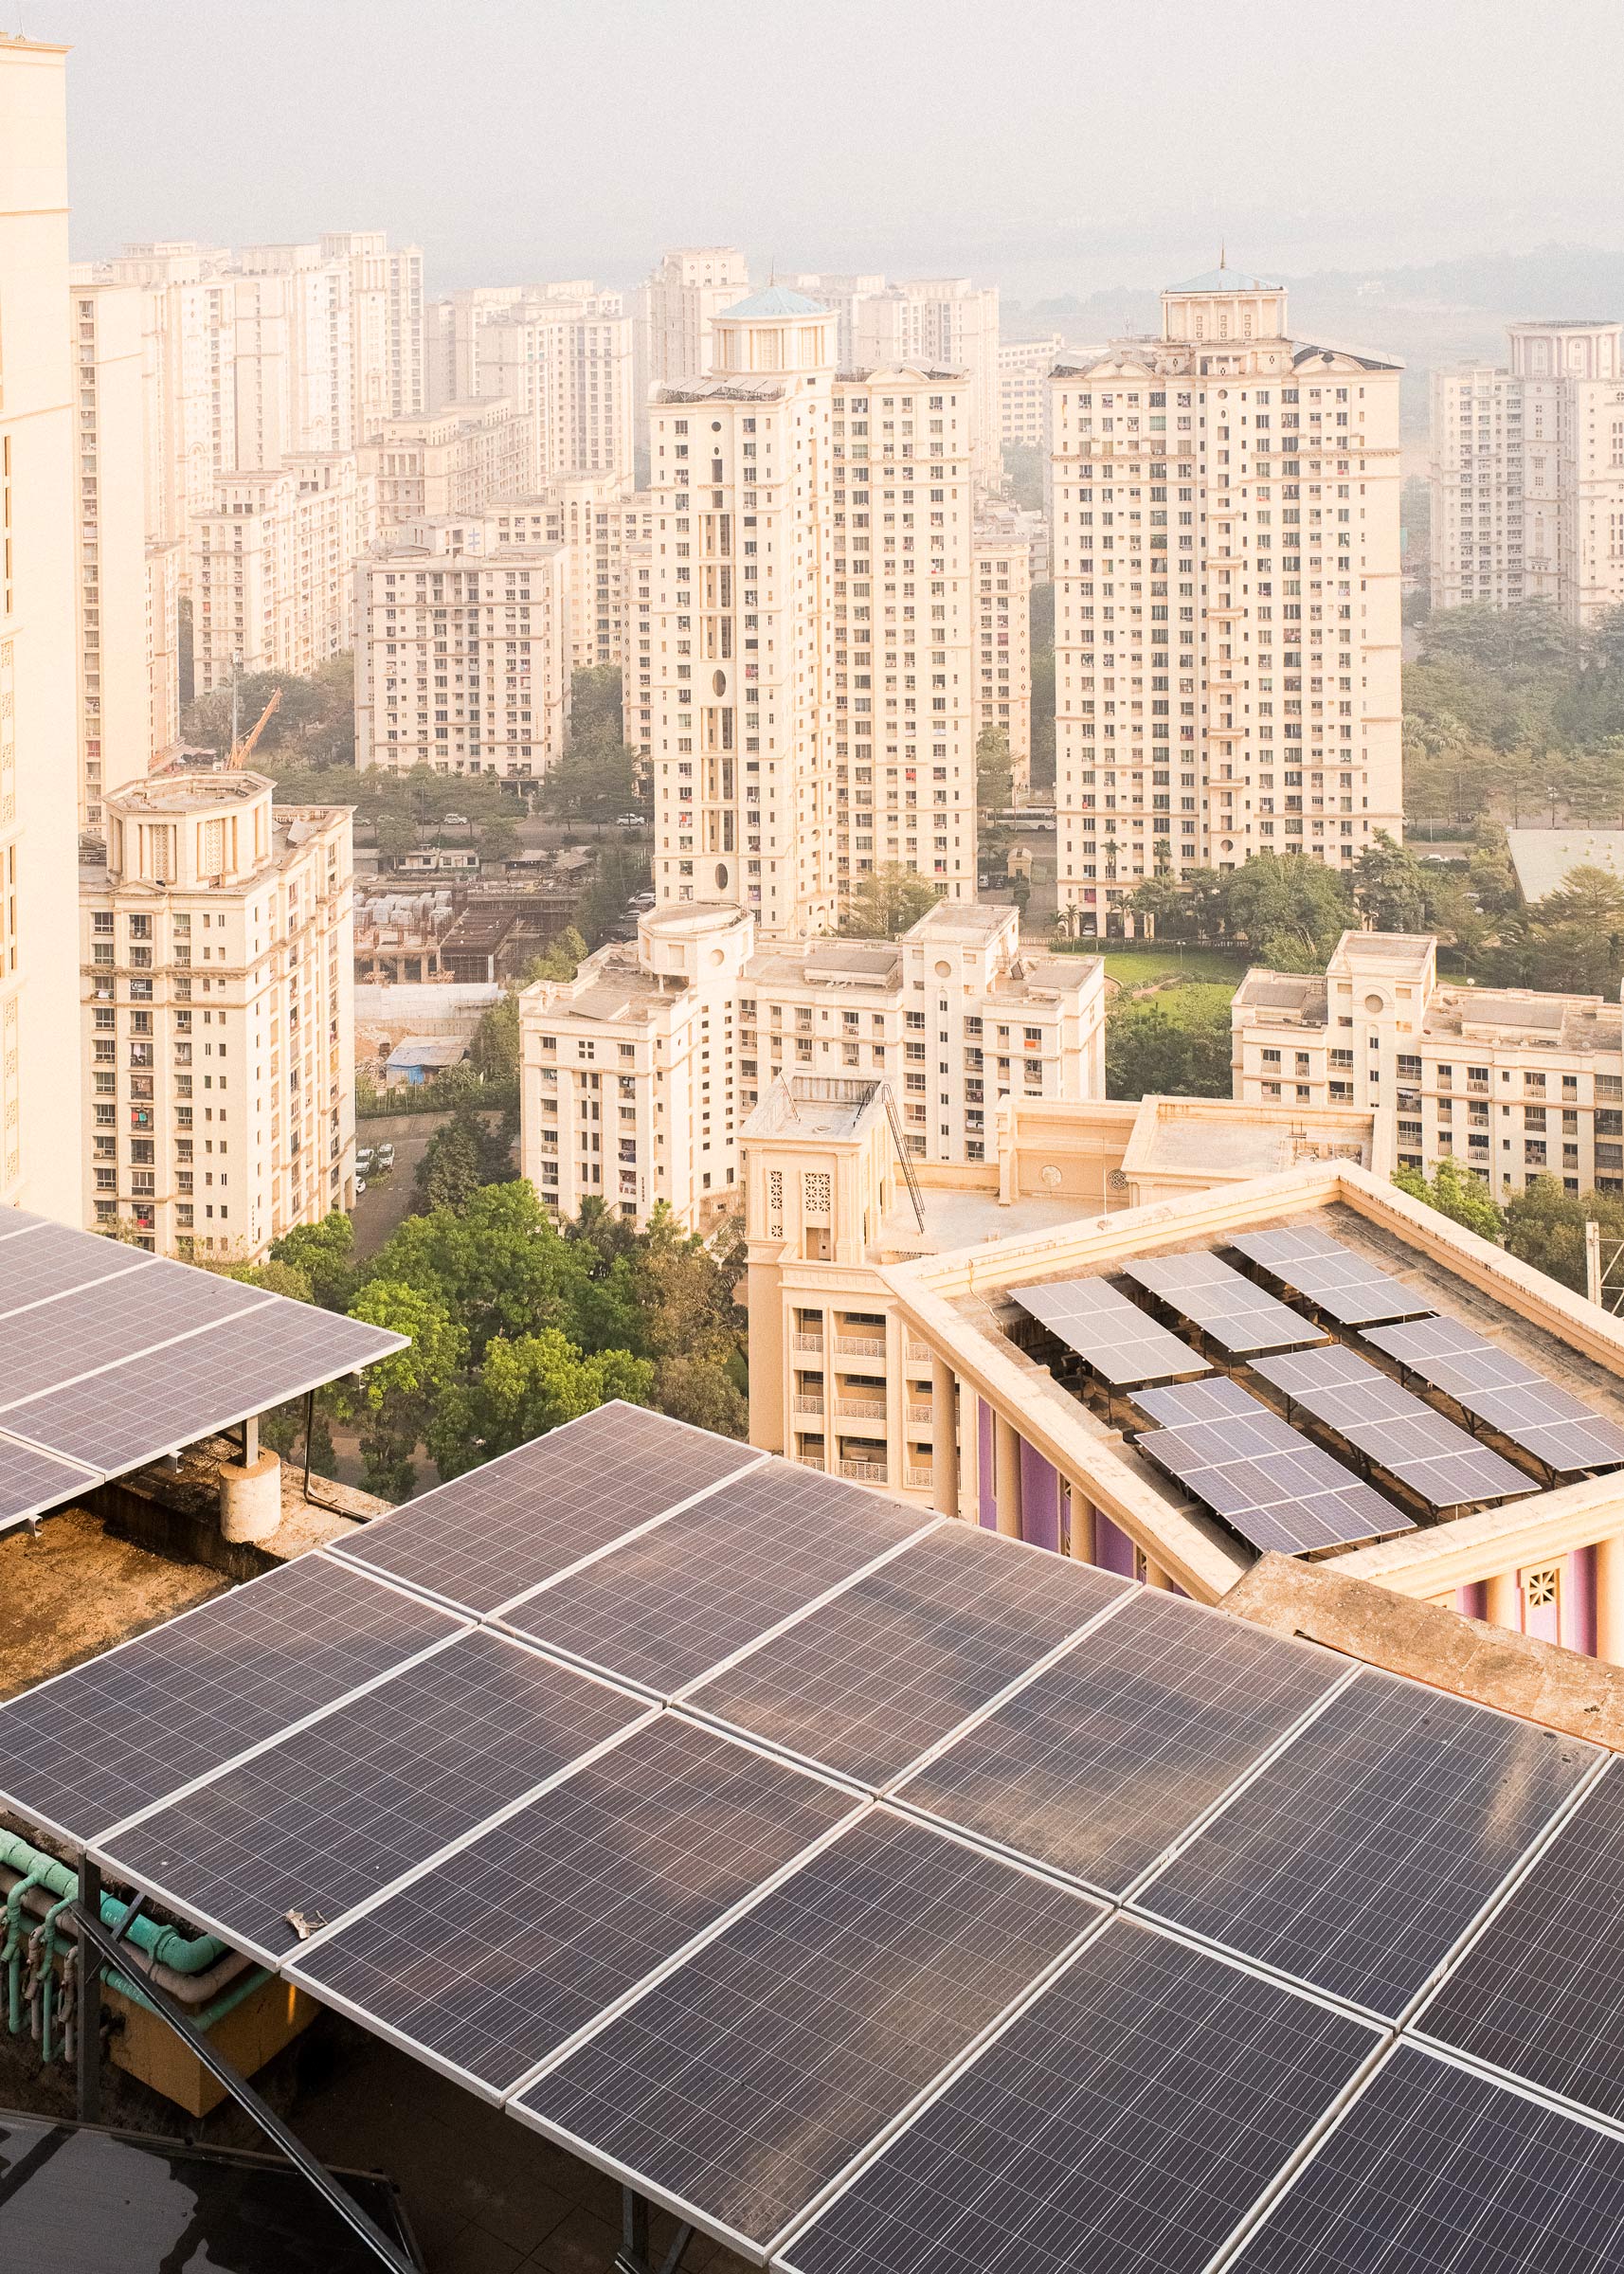 Solar panels installed by Koku Solar Pvt. Ltd line the rooftops of residential buildings in Mumbai, allowing them to run using green energy. (Sarker Protick for TIME)